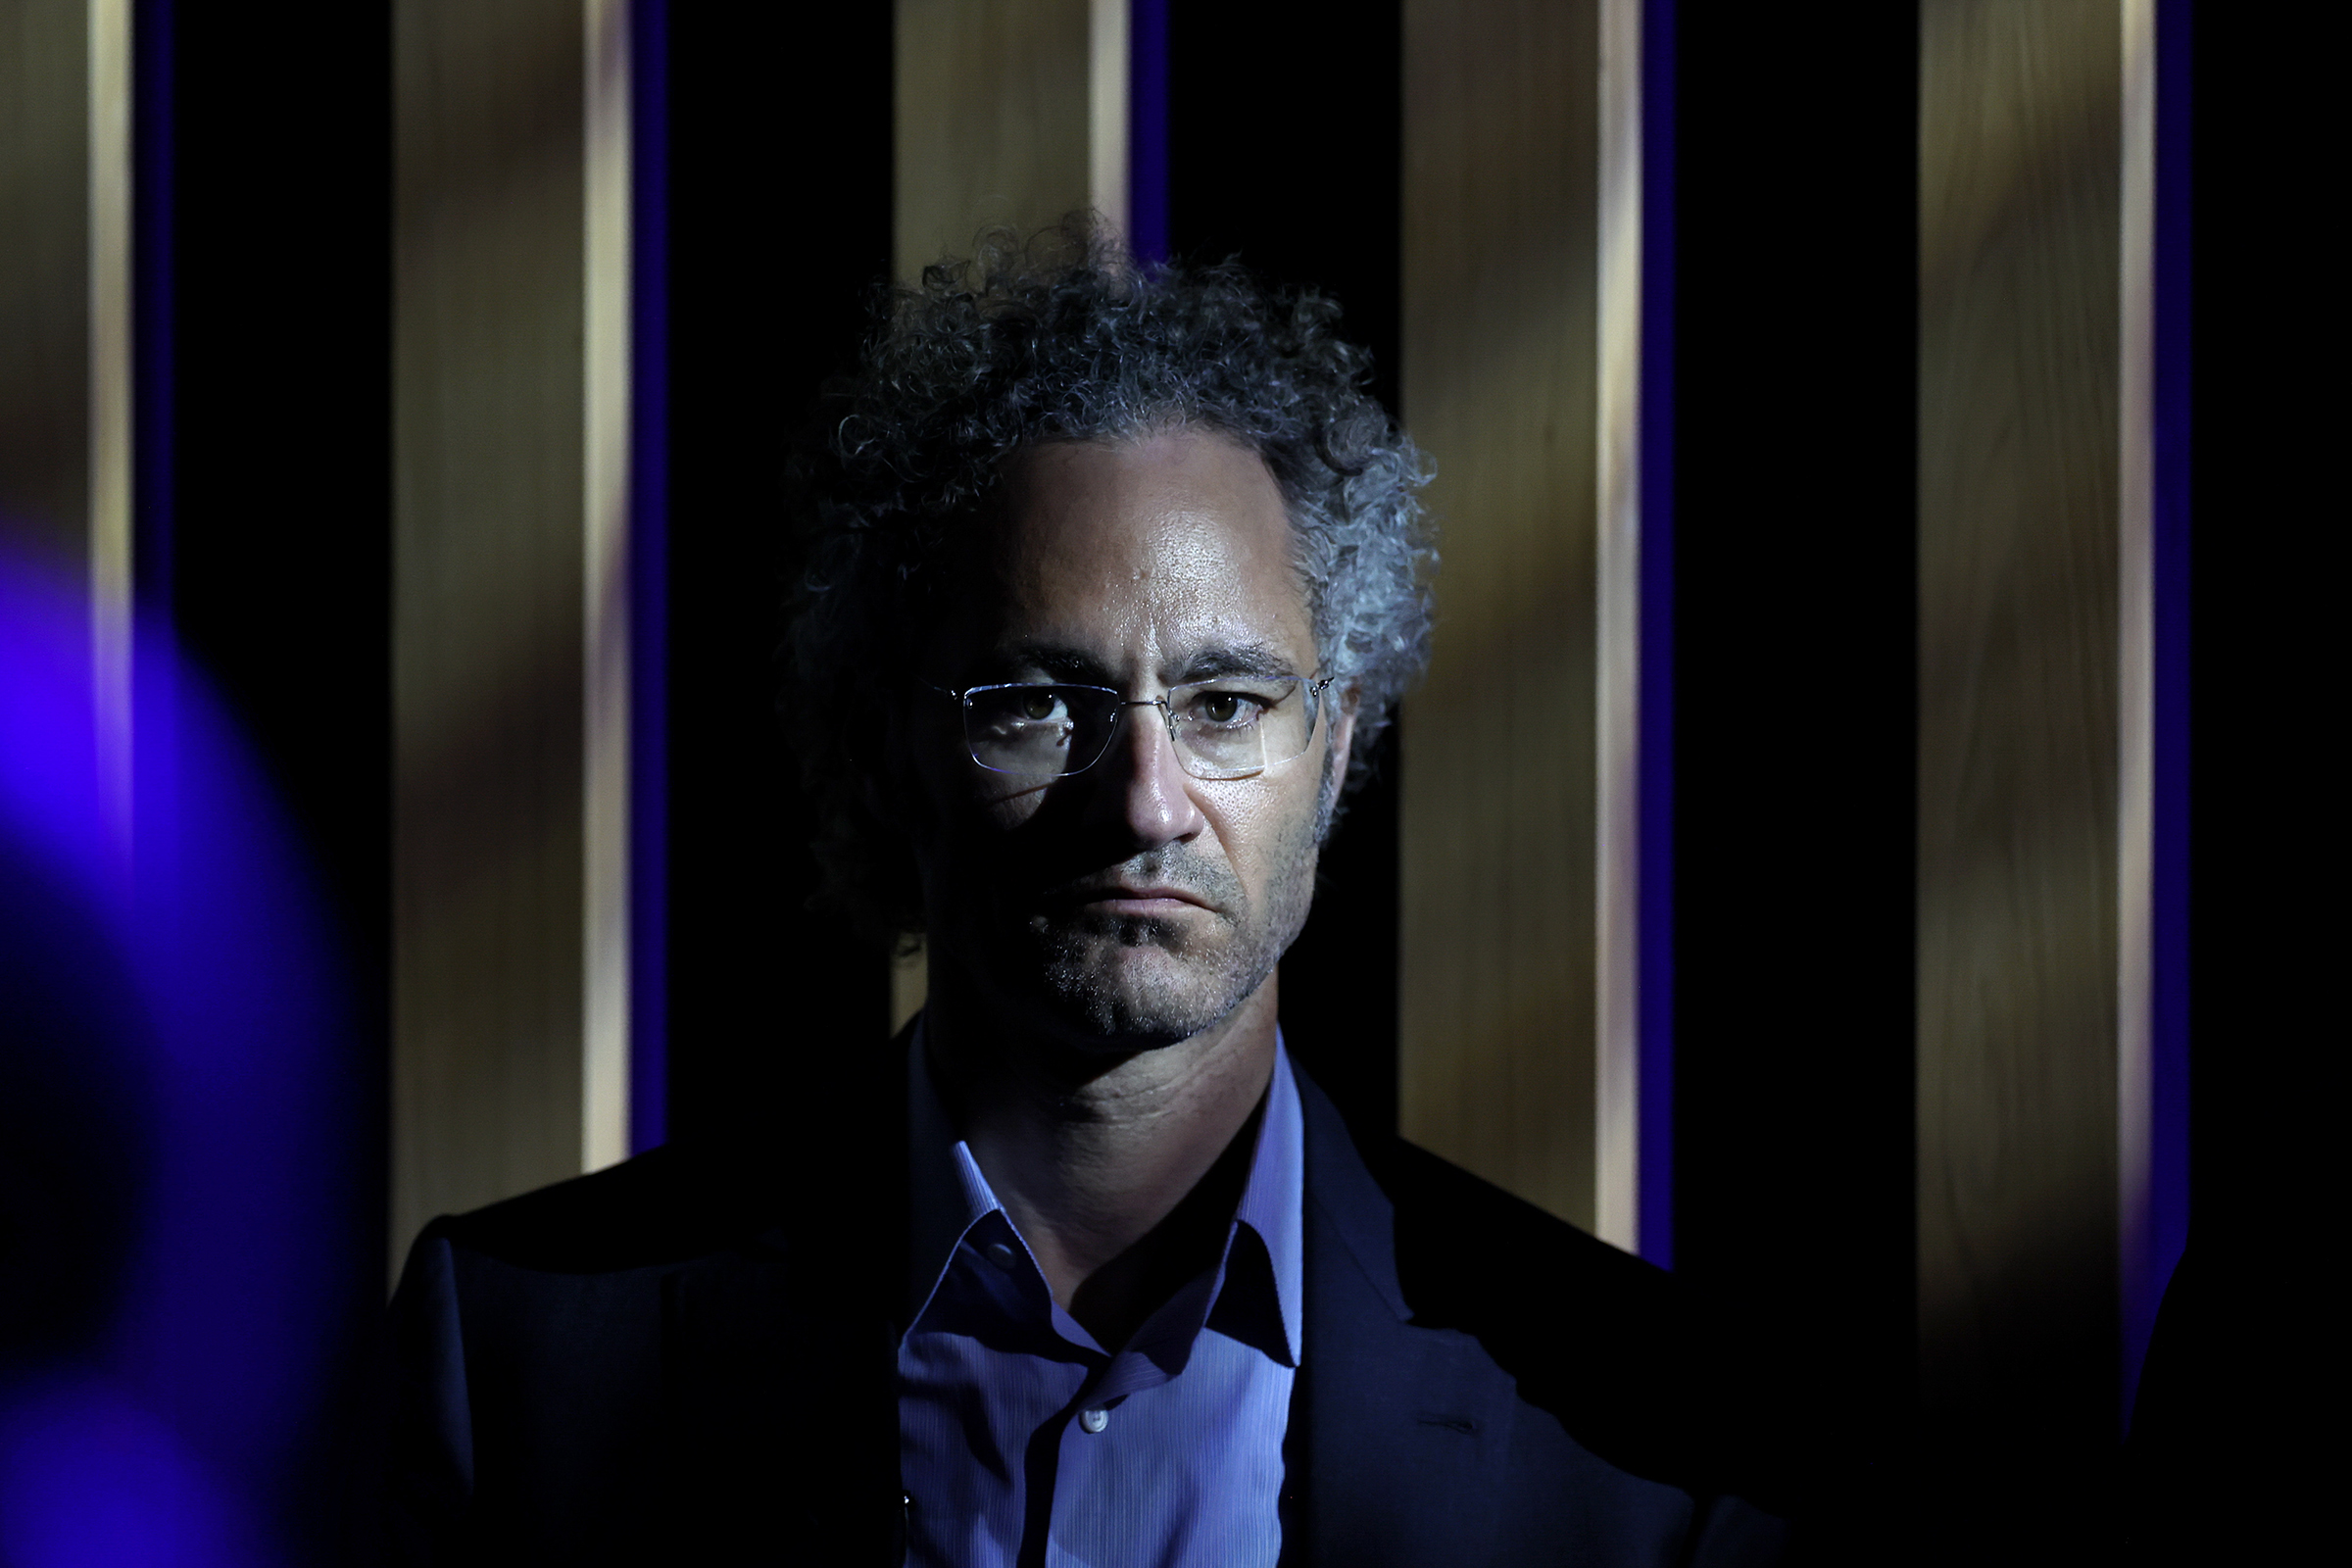 Karp, Palantir’s CEO, casts his company’s mission as using cutting-edge technology to defend the West against global adversaries